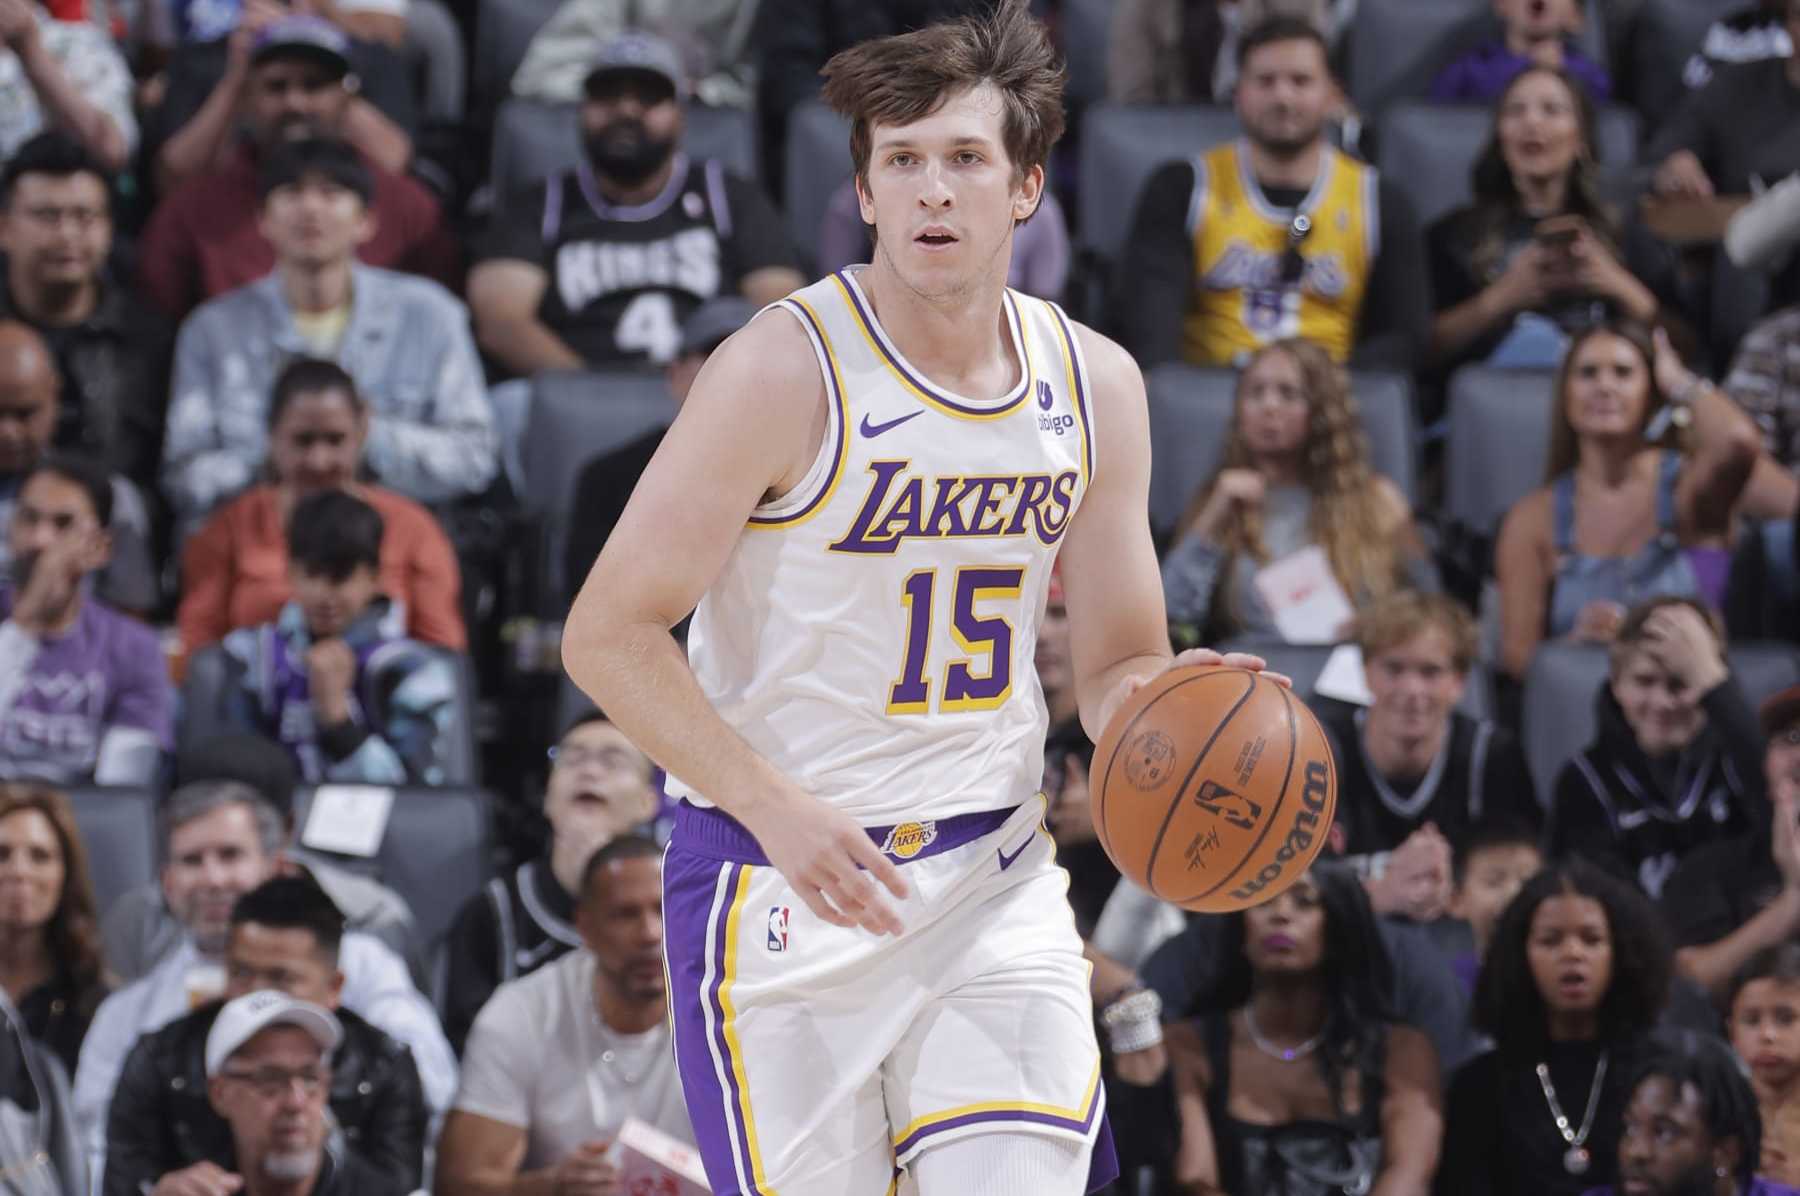 Lakers’ Austin Reeves dubbed LeBron James by fans as Kings lose in overtime